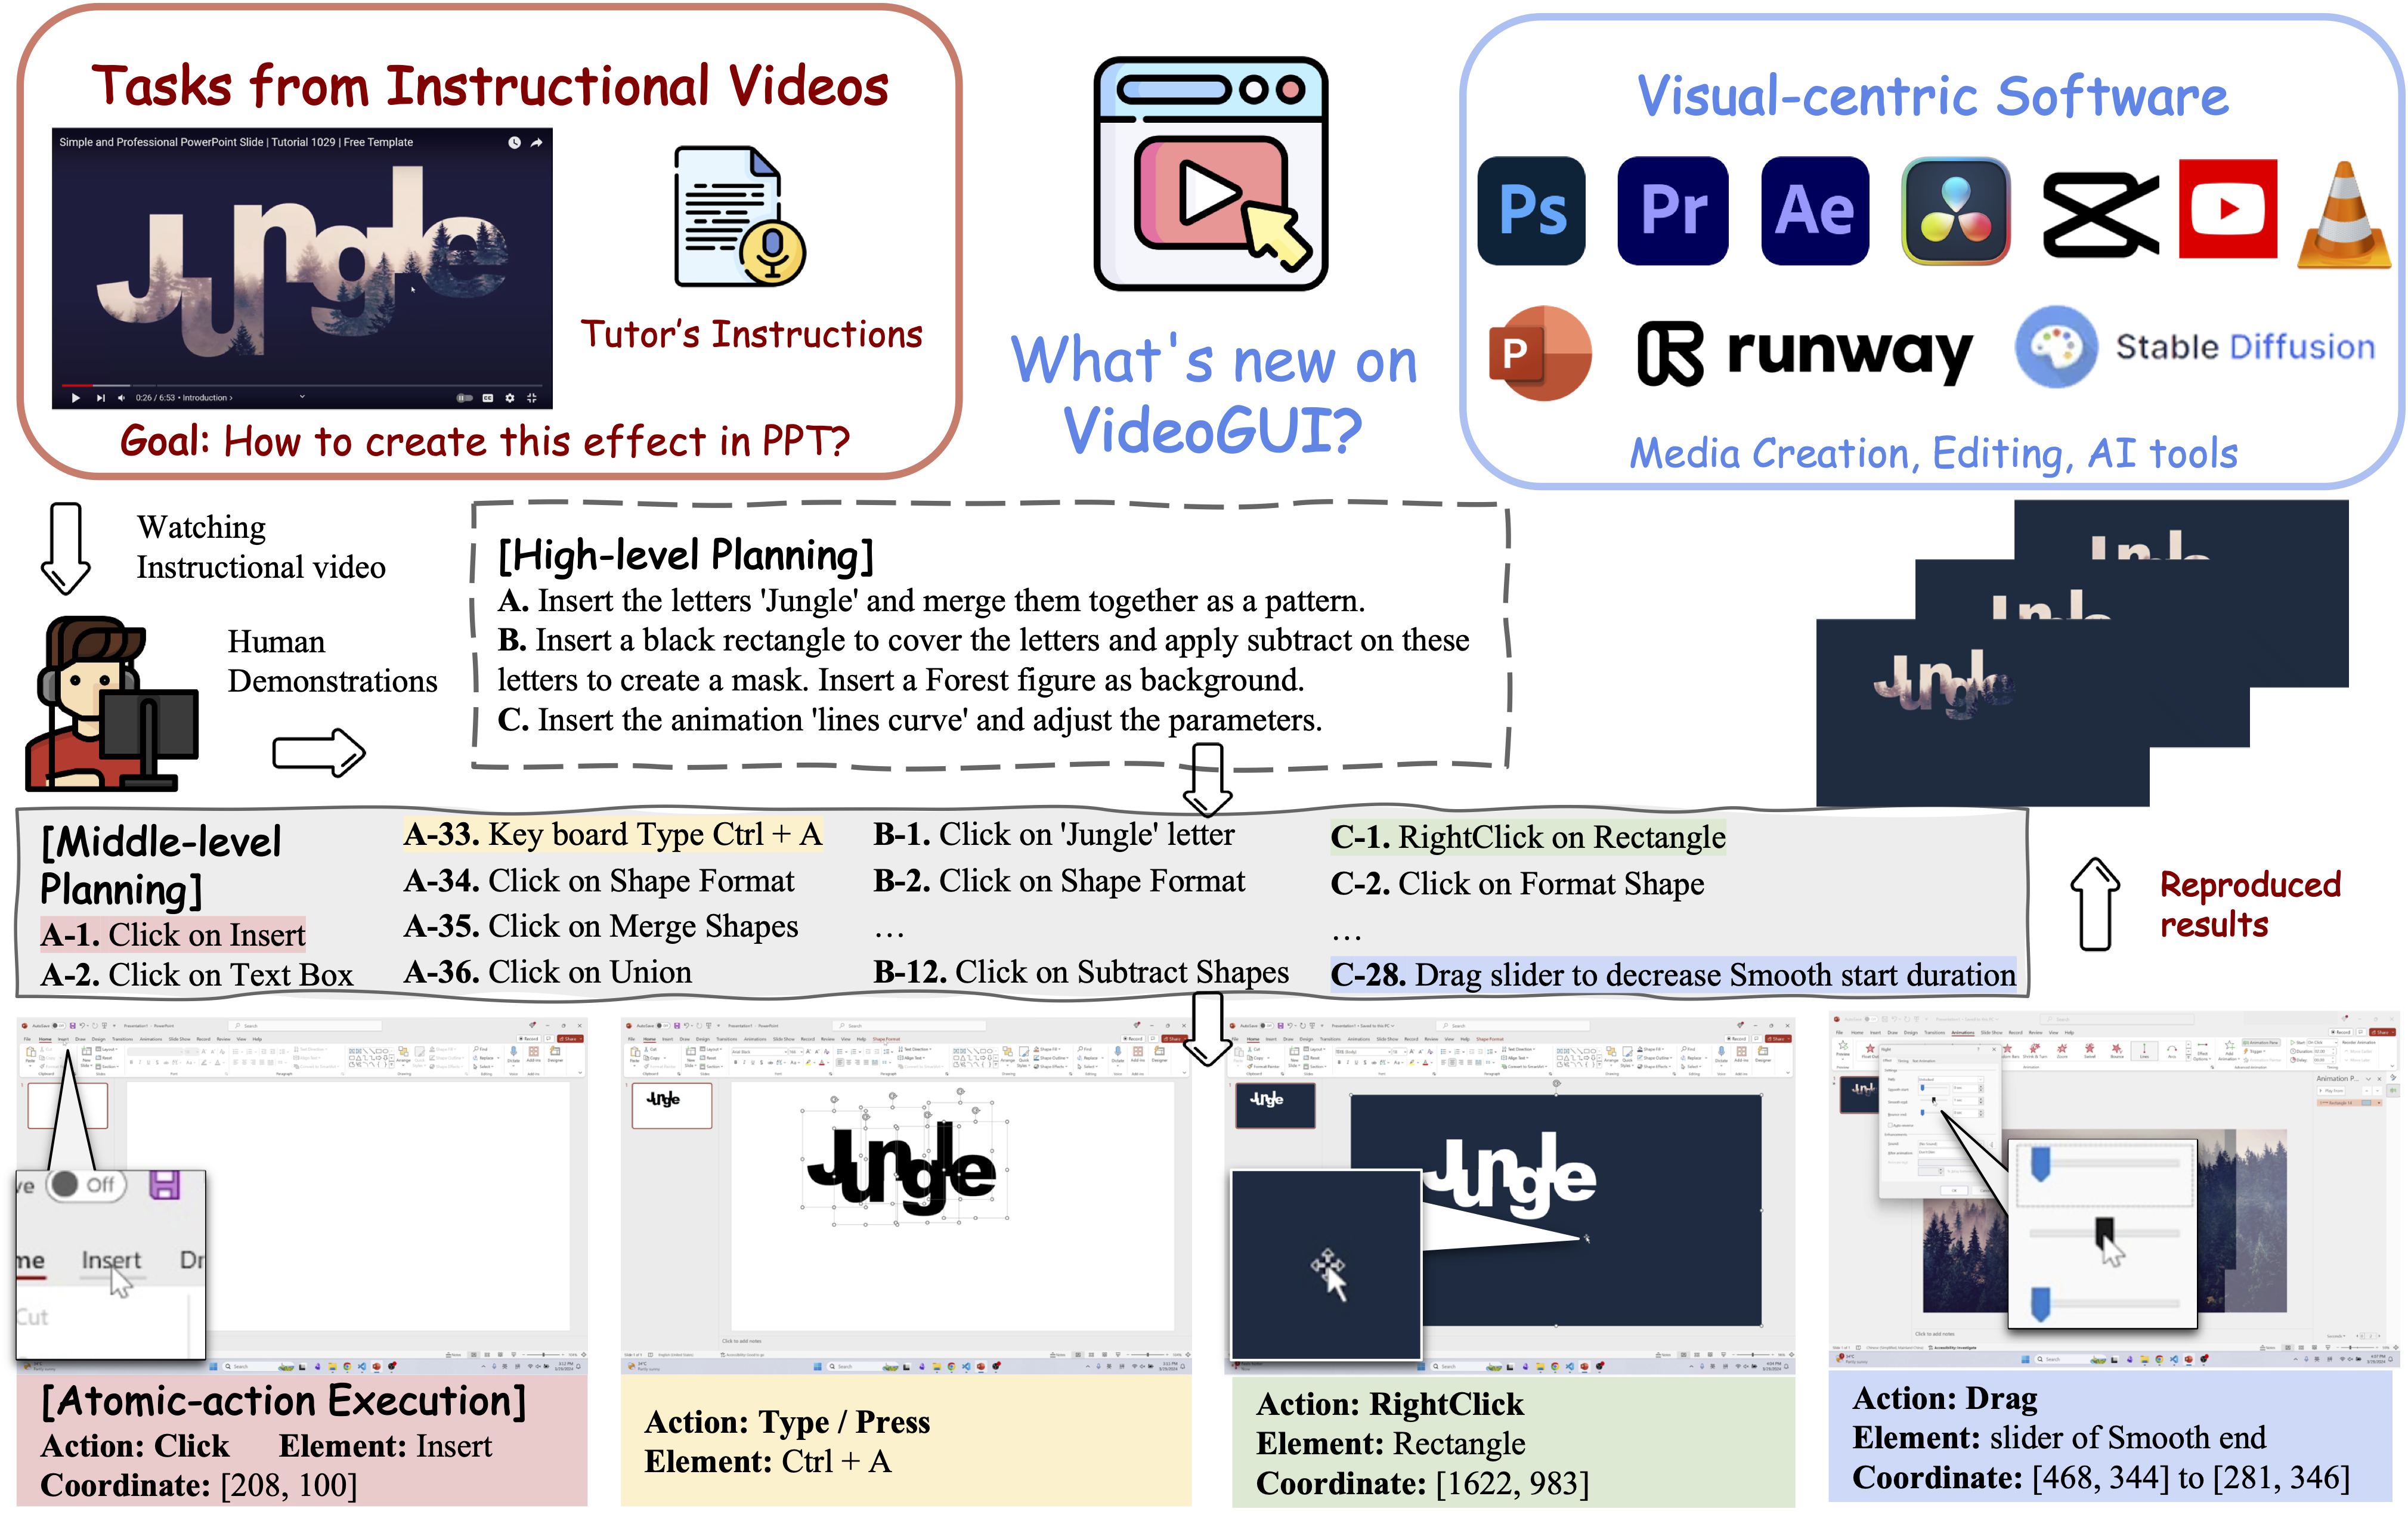 A brief illustration of VideoGUI. VideoGUI focuses on professional and novel software like PR, AE for video editing, and Stable Diffusion, Runway for visual creation. We source tasks from high-quality instructional videos, with annotators replicating these to reproduce effects; We provide detailed annotations with planning procedures and recorded actions for hierarchical evaluation.